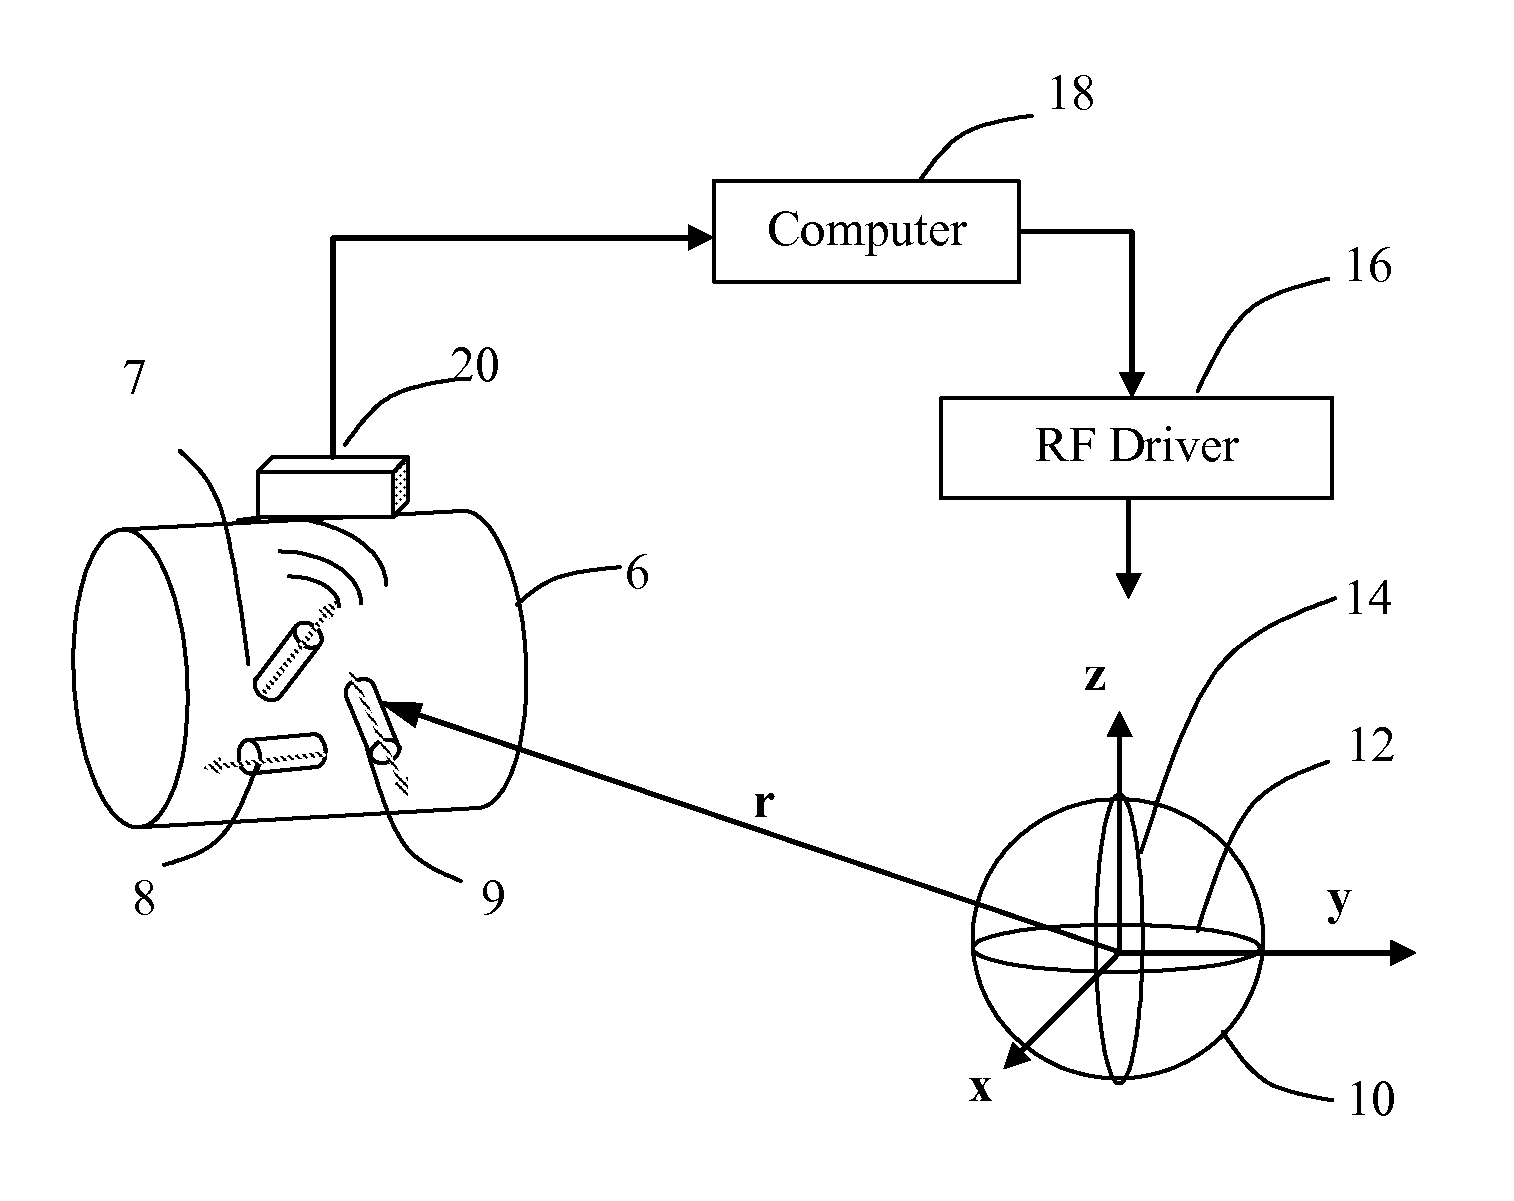 Method and Apparatus for Detecting Object Orientation and Position